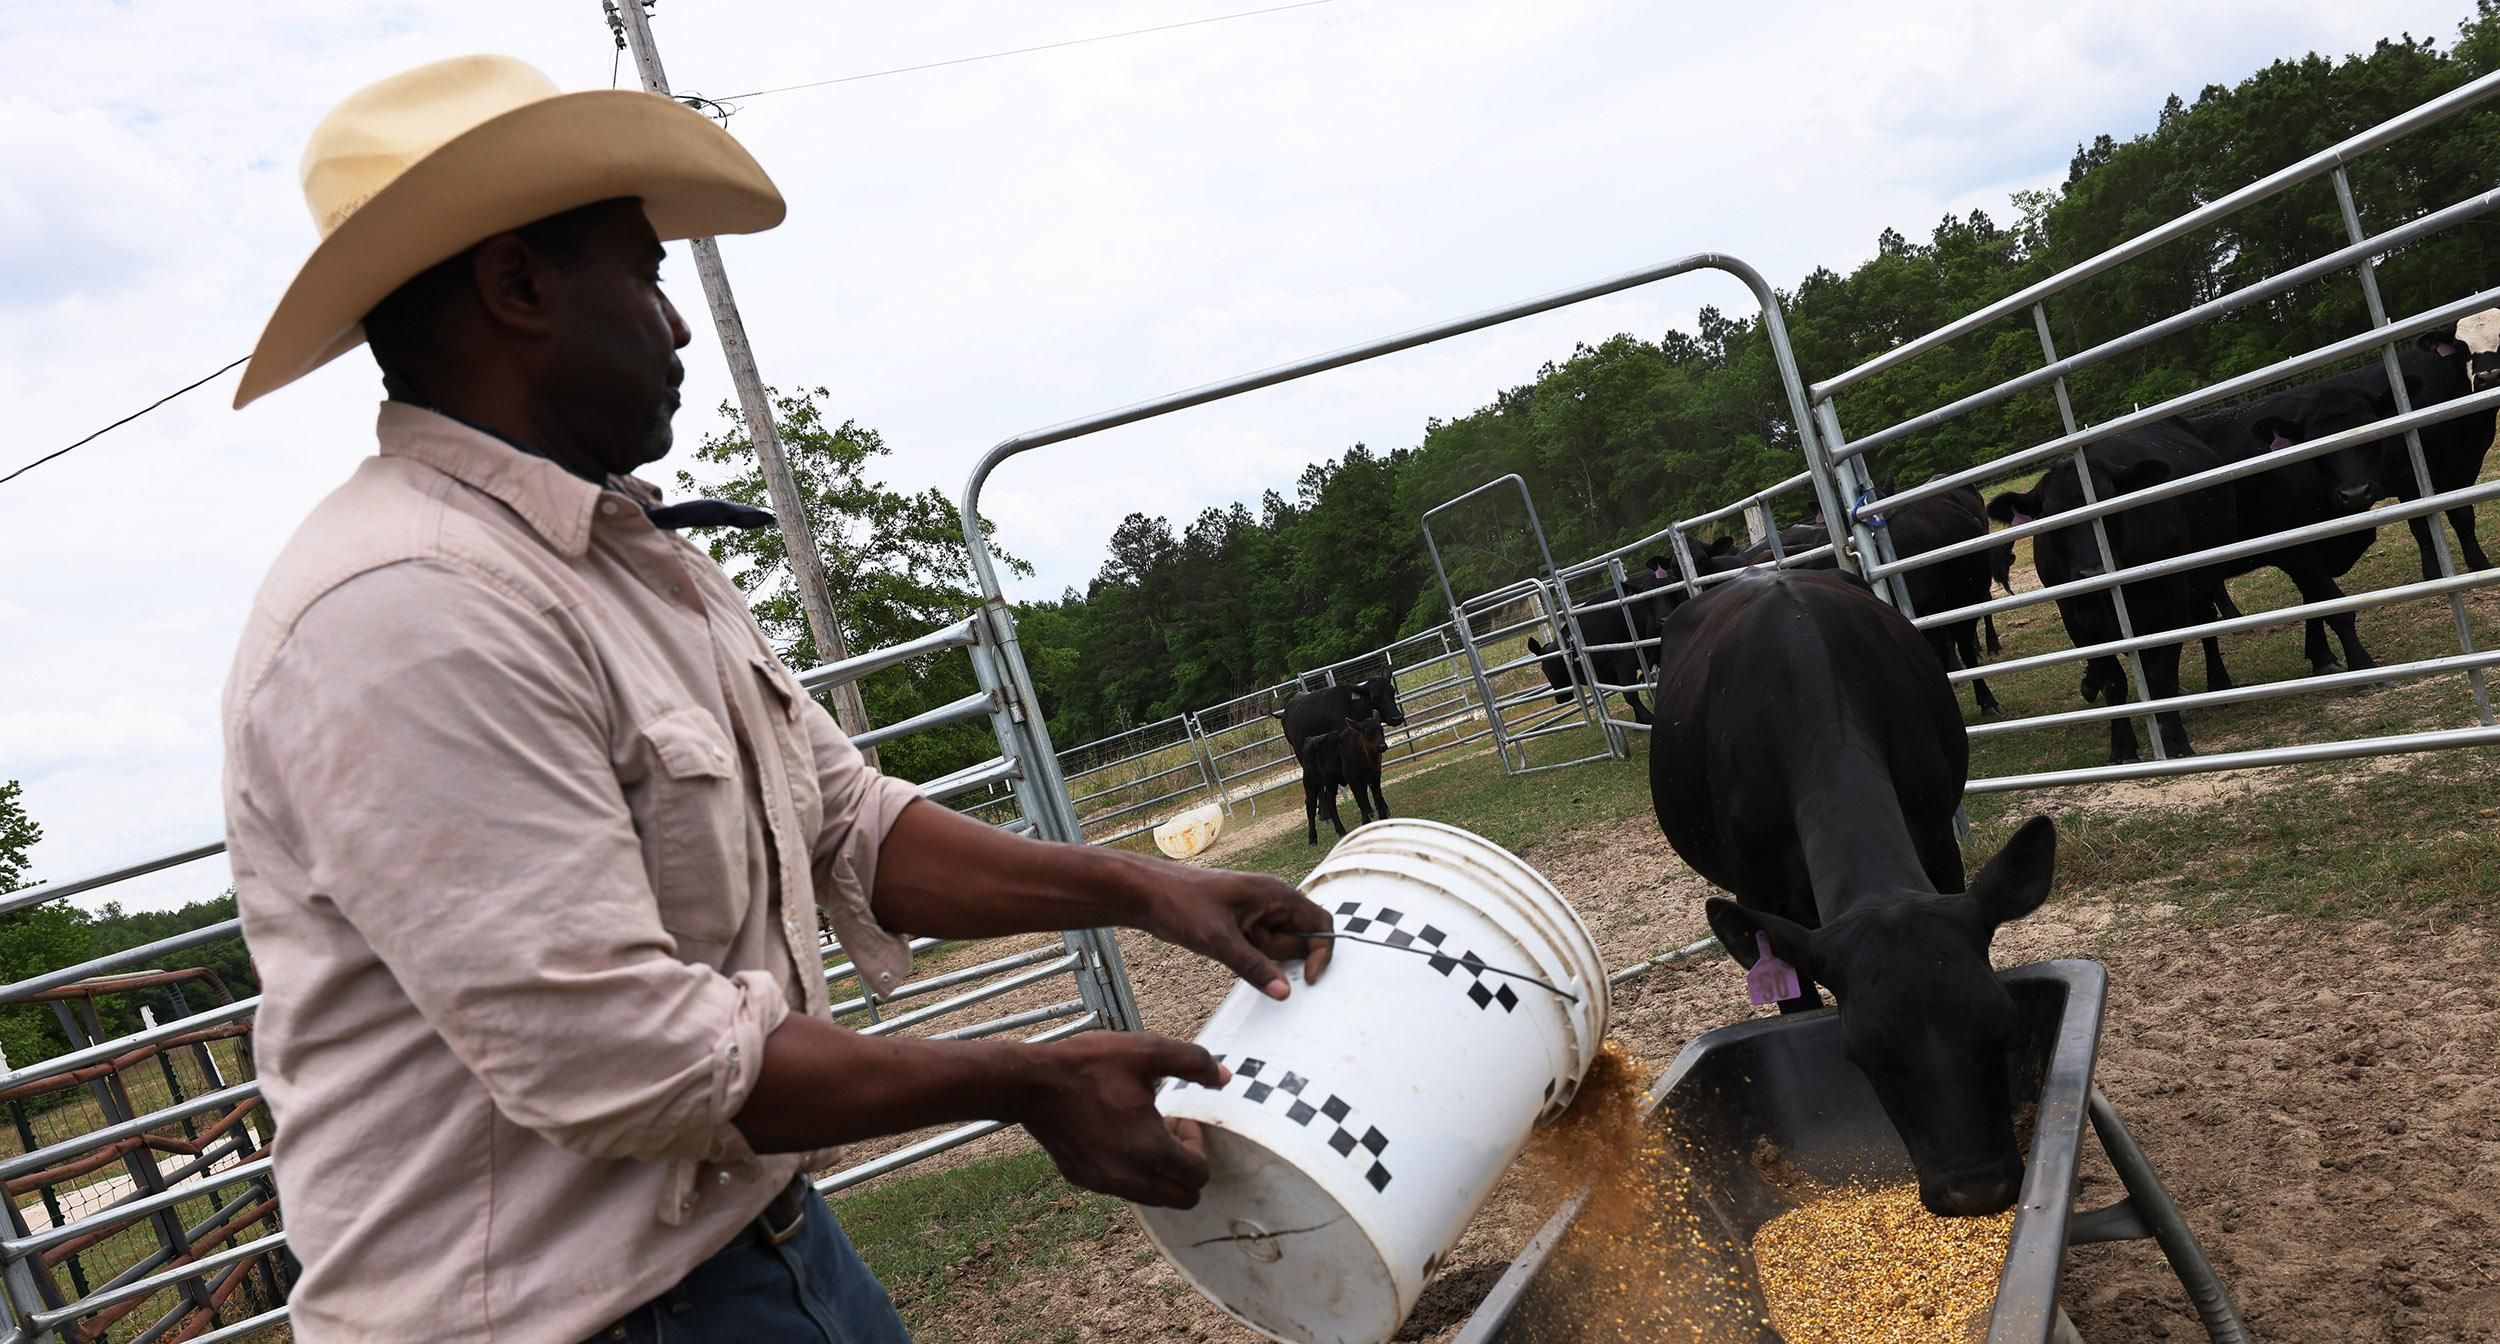 Handy Kennedy, founder of AgriUnity cooperative, feeds his cows on HK Farms on April 20, 2021 in Cobbtown, Georgia.